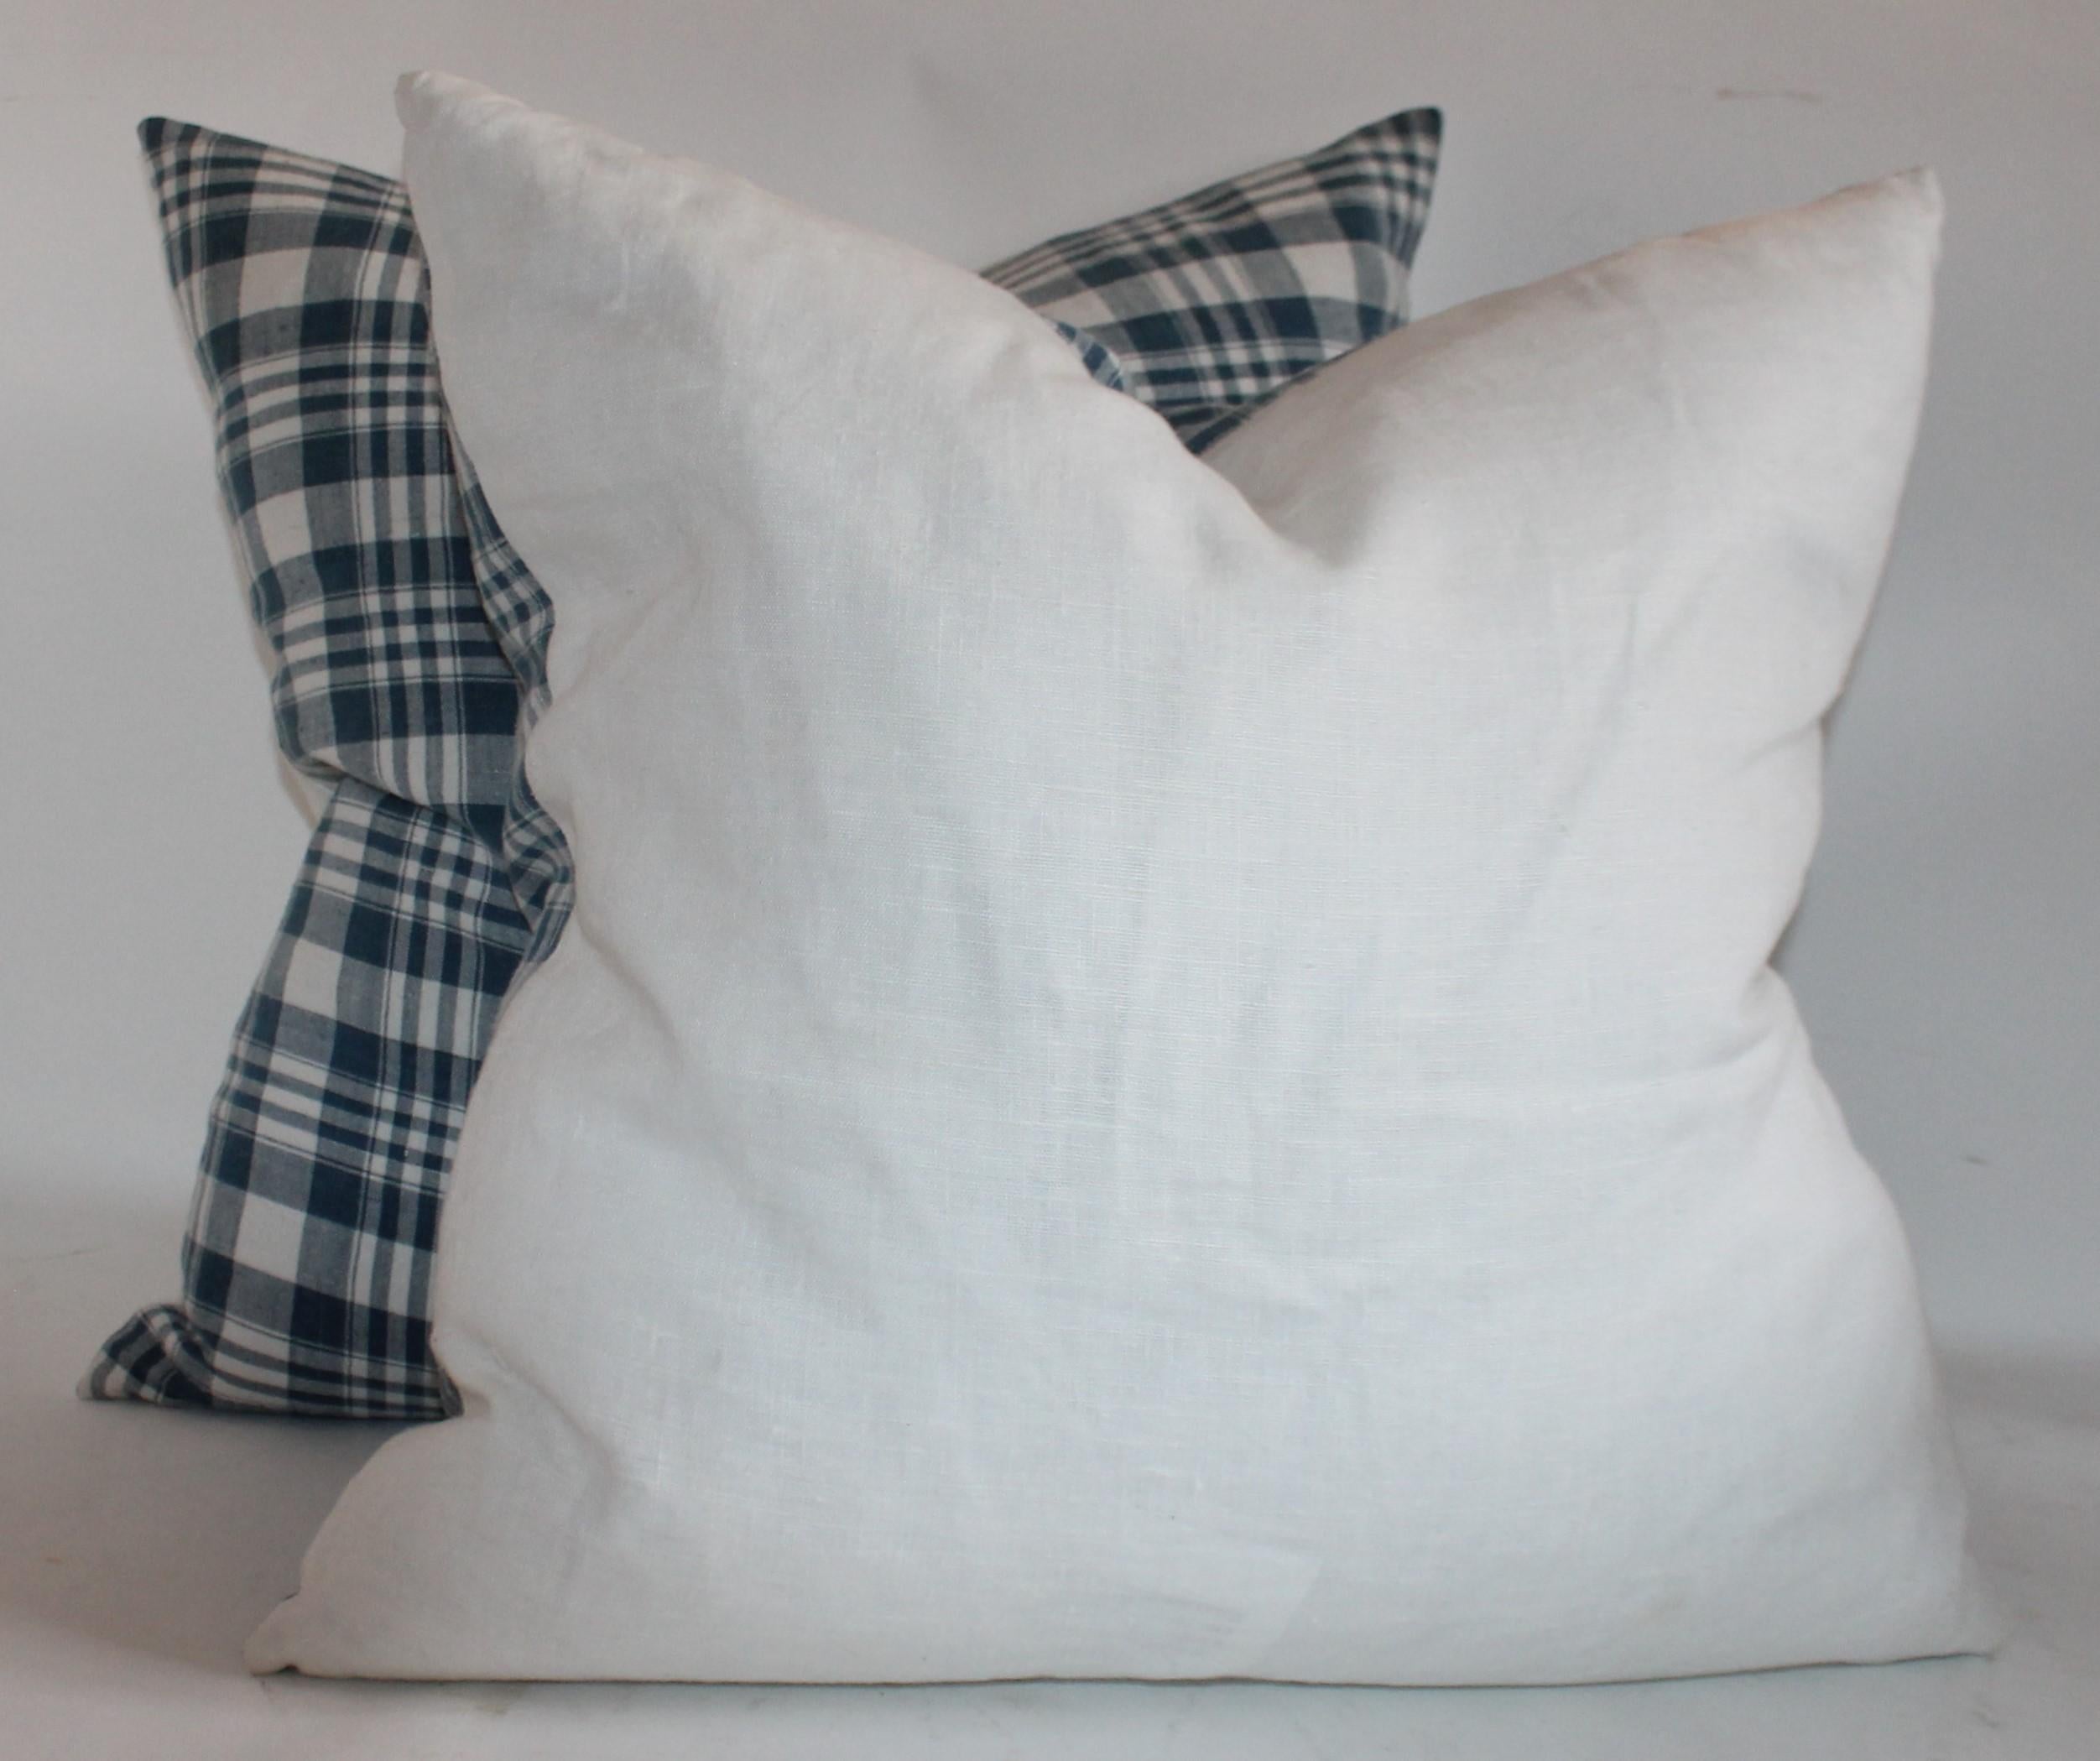 Hand-Crafted Muted Blue & White Homespun Linen Pillows, Collection of Four Pillows For Sale